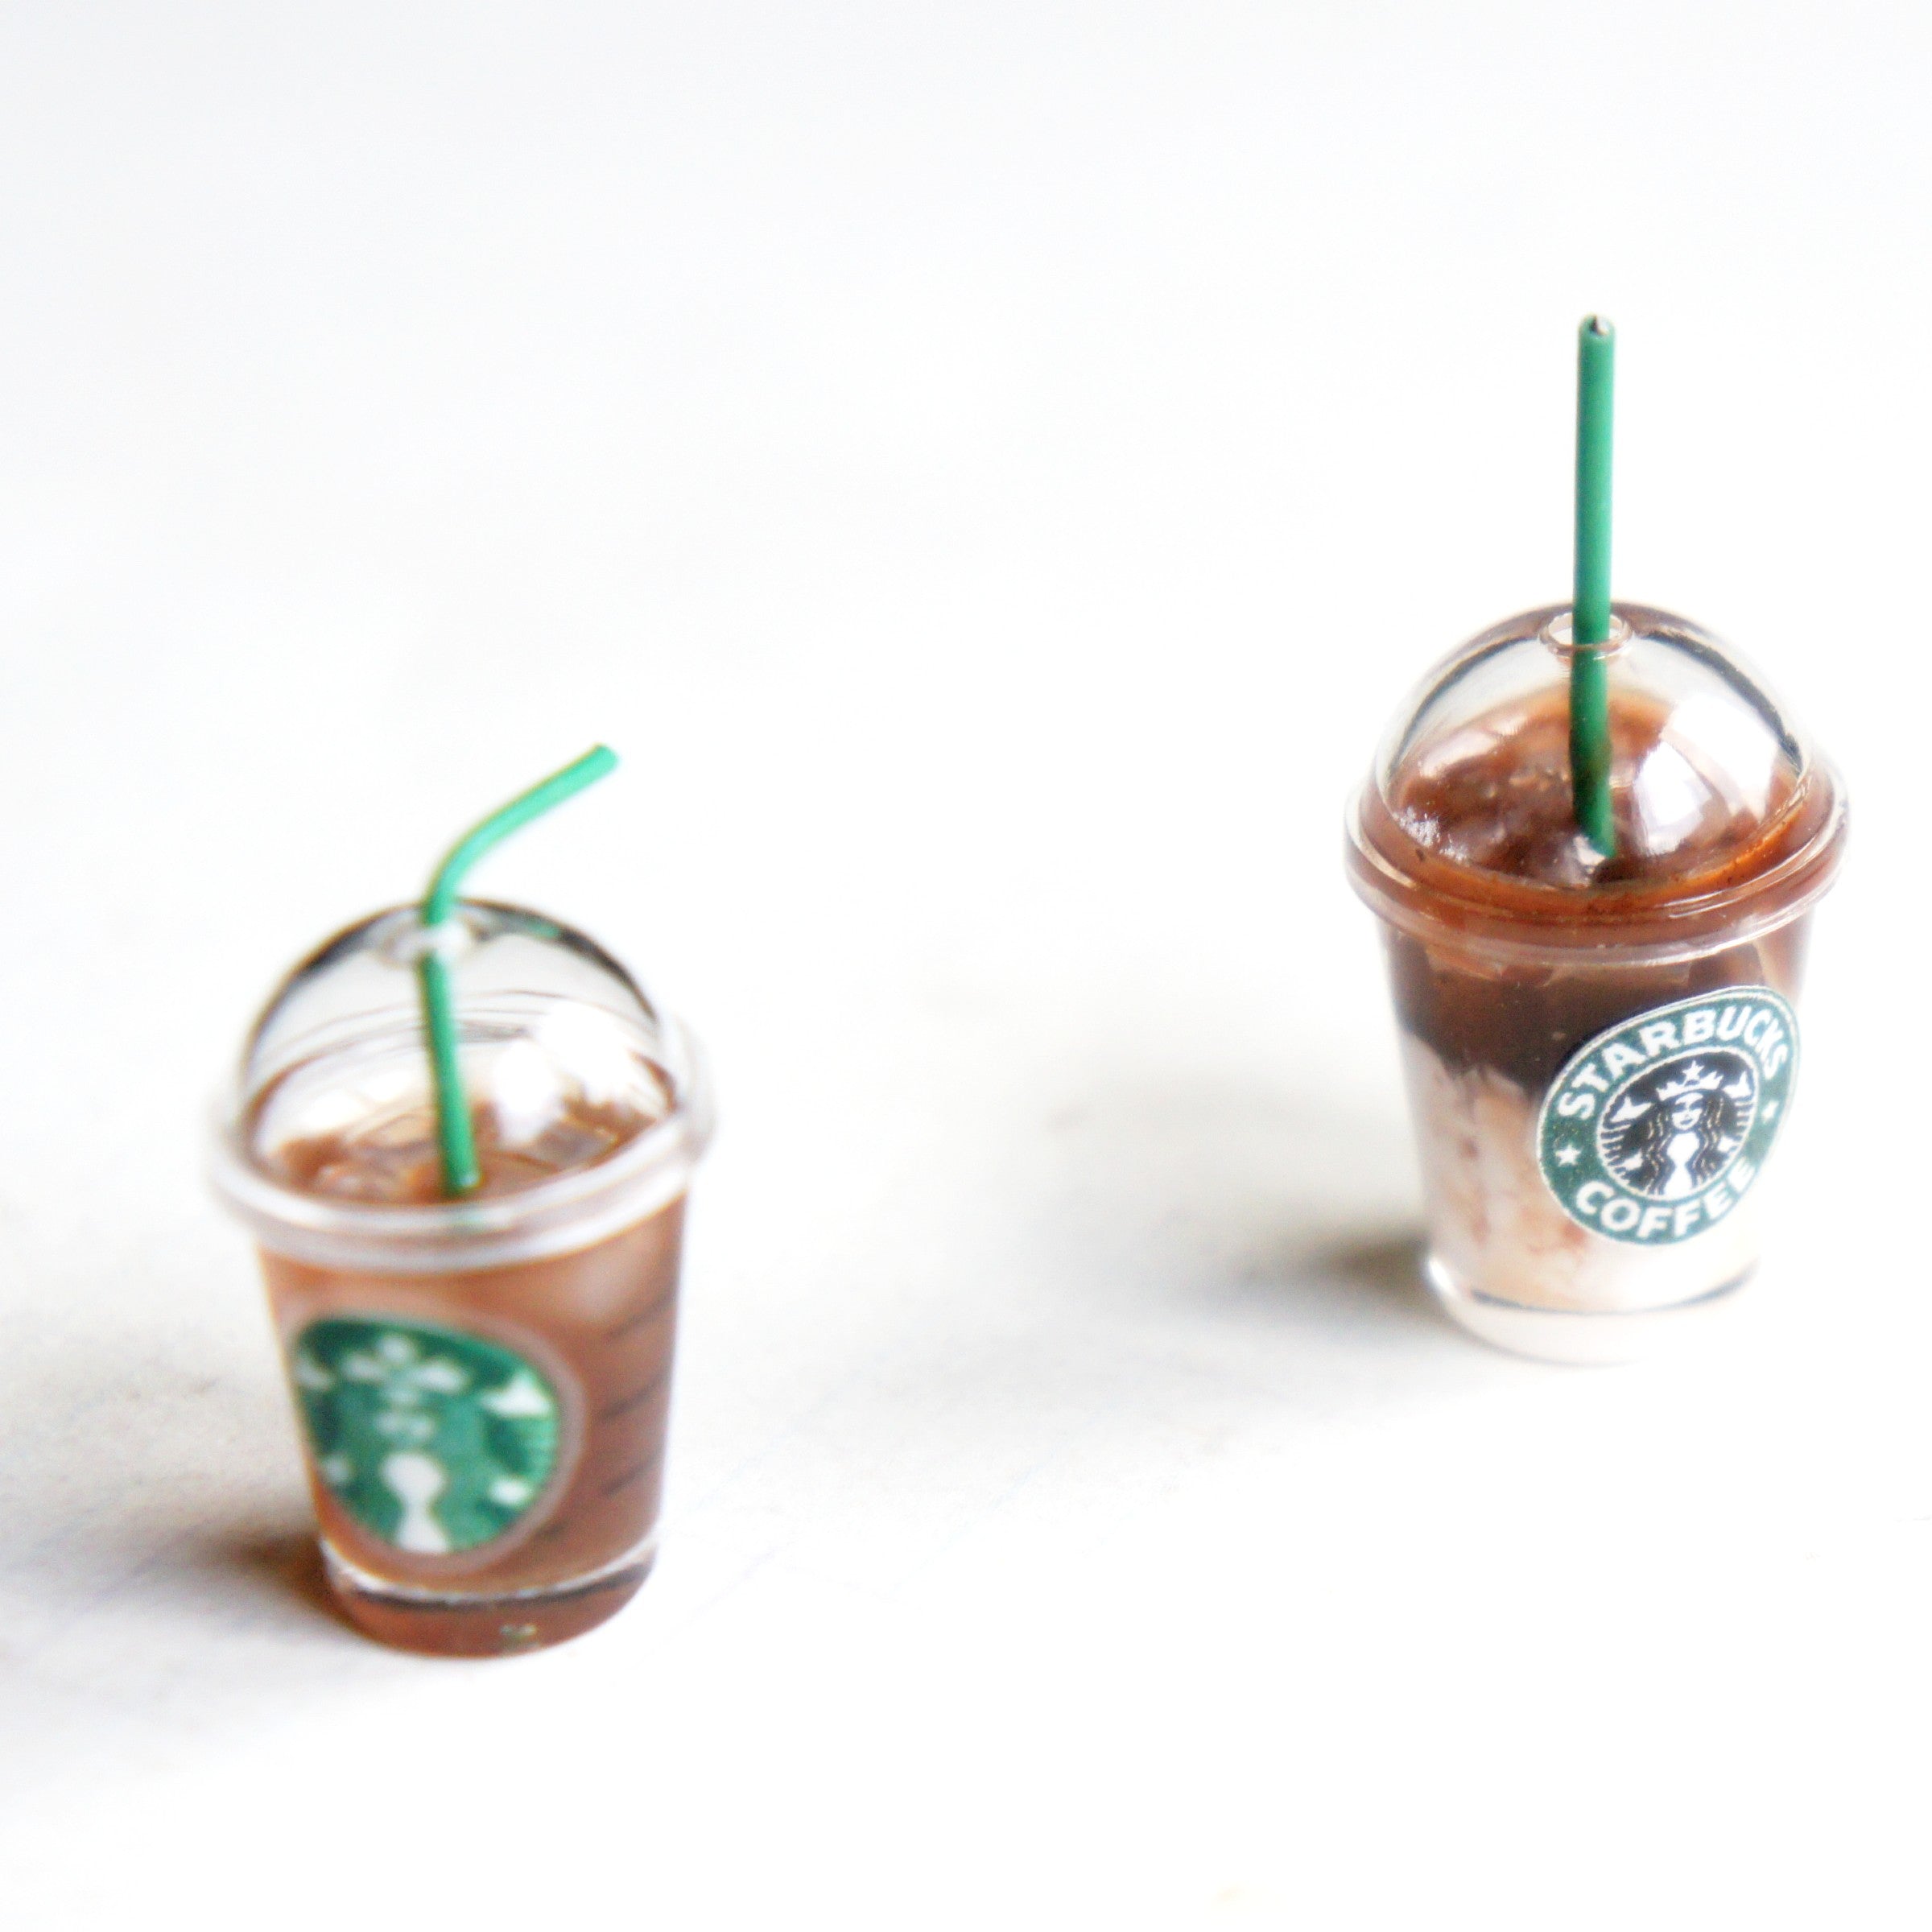 Starbucks Iced Coffee Ring - Jillicious charms and accessories